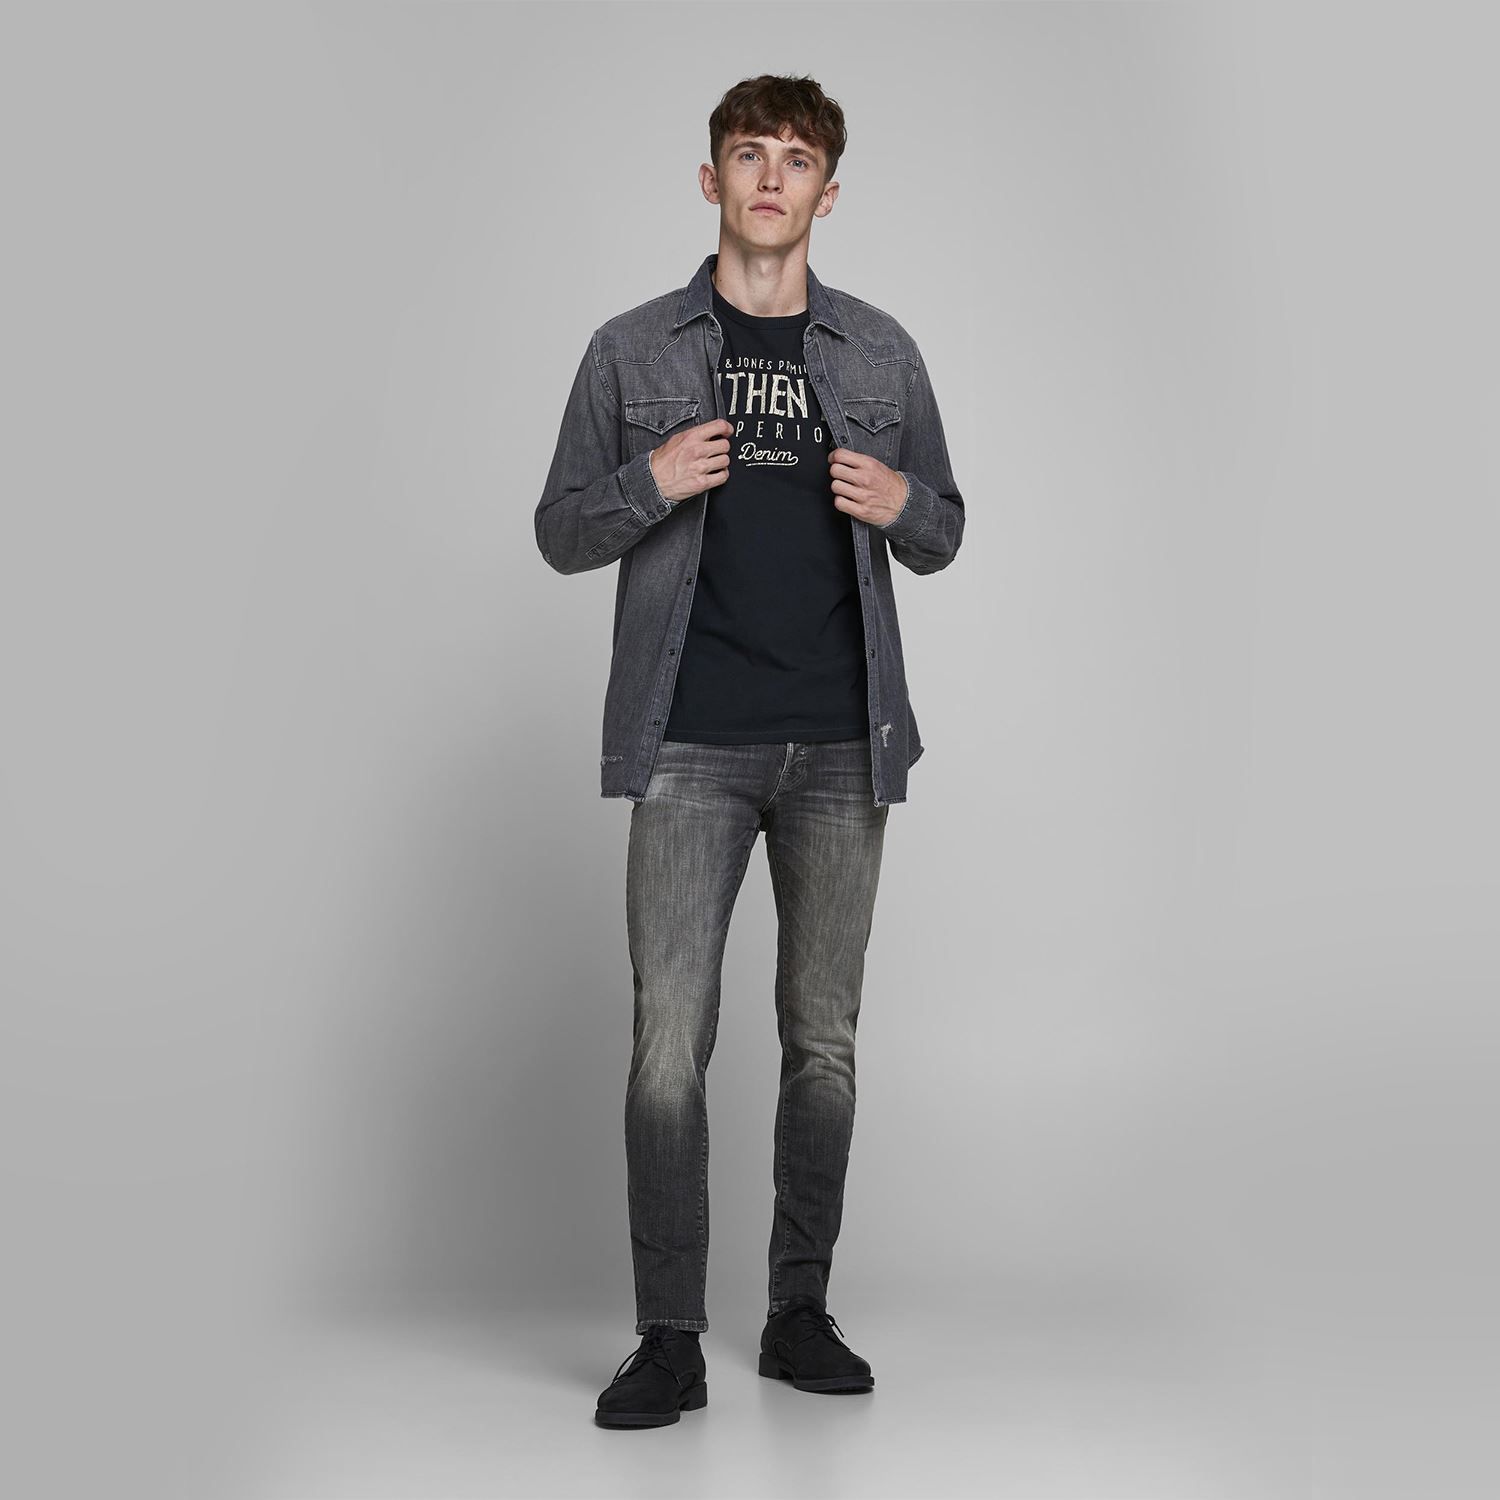 For that urban edge look, look no further than this pair of slim-fit biker jeans from Jack & Jones. High on street style edginess, make a statement in this pair teamed with a tee and cool biker jacket!

Slim Fit Glenn: Glenn is an updated slim fit with a tapered leg. The fit is narrow and leans through the thigh without feeling tight, and it always comes with stretch. Glenn is for the guy who likes his jeans slim, not skinny.
Fox Styling: Fox is the upbeat cousin to classic five-pocket jeans. It’s got all the familiar features, but the design and detailing is a little more playful; the front pockets are slanted, the back pockets are pointy, and it’s got a square rivet on the coin pocket.
Super Stretch 50%: Super Stretch is denim that stretches 1.5 times its actual size. The high amount of stretch makes it a comfortable experience to wear skin-tight jeans. And you don’t have to worry about jeans that get saggy once you’ve worn them a few times. The special yarn spun from a unique mix of cotton, polyester, and elastane gets rid of that concern.

Features:
Slim-fit for a sleek, modern silhouette
Five-pocket jeans with cutting-edge styling
Button fly
Super Stretch 50% stretches 1.5x its actual size

Specifics:
Material: 91% Cotton, 7% Polyester, 2% Elastane
Product Code: 12175890

Washing Instruction:
Machine wash at 30°C
Tumble dry on low heat settings

Iron Temp: On medium heat setting

Note: Do not bleach, Dry clean (no trichloroethylene)

Package Includes: Jack&Jones Glenn Fox Slim Fit Jeans (Black Denim) Select your Size